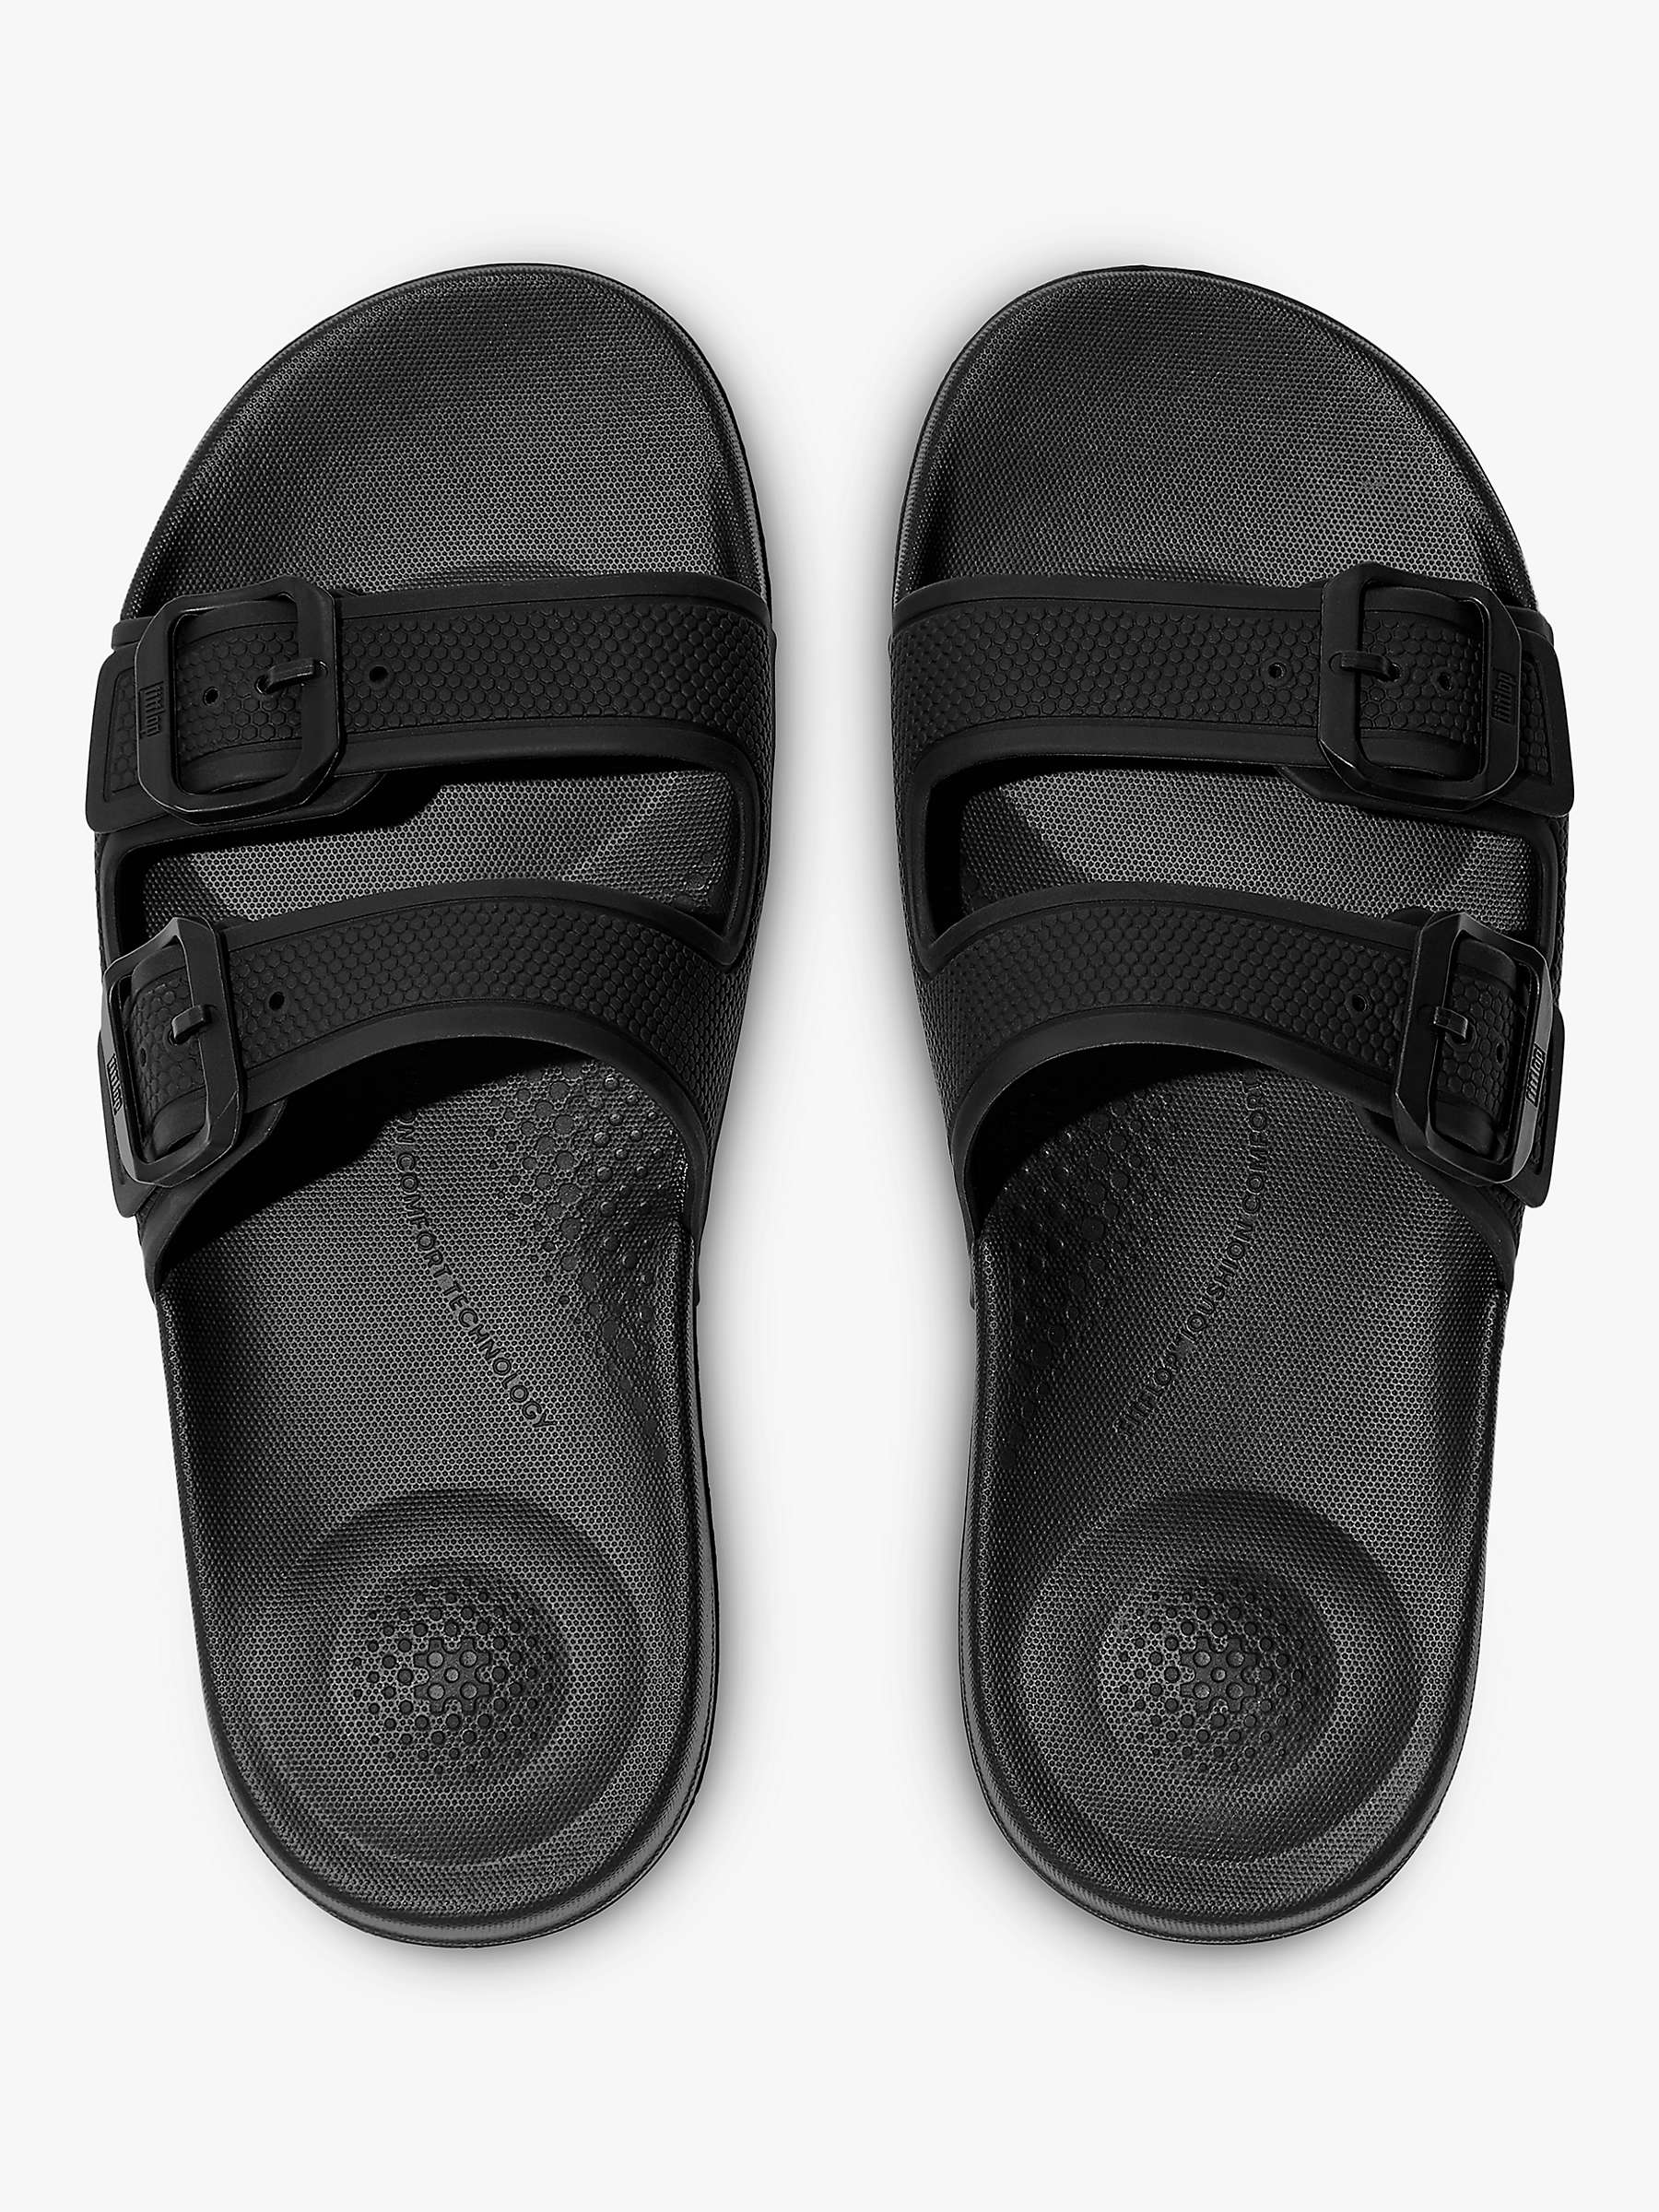 FitFlop IQushion Slider Sandals, Black at John Lewis & Partners